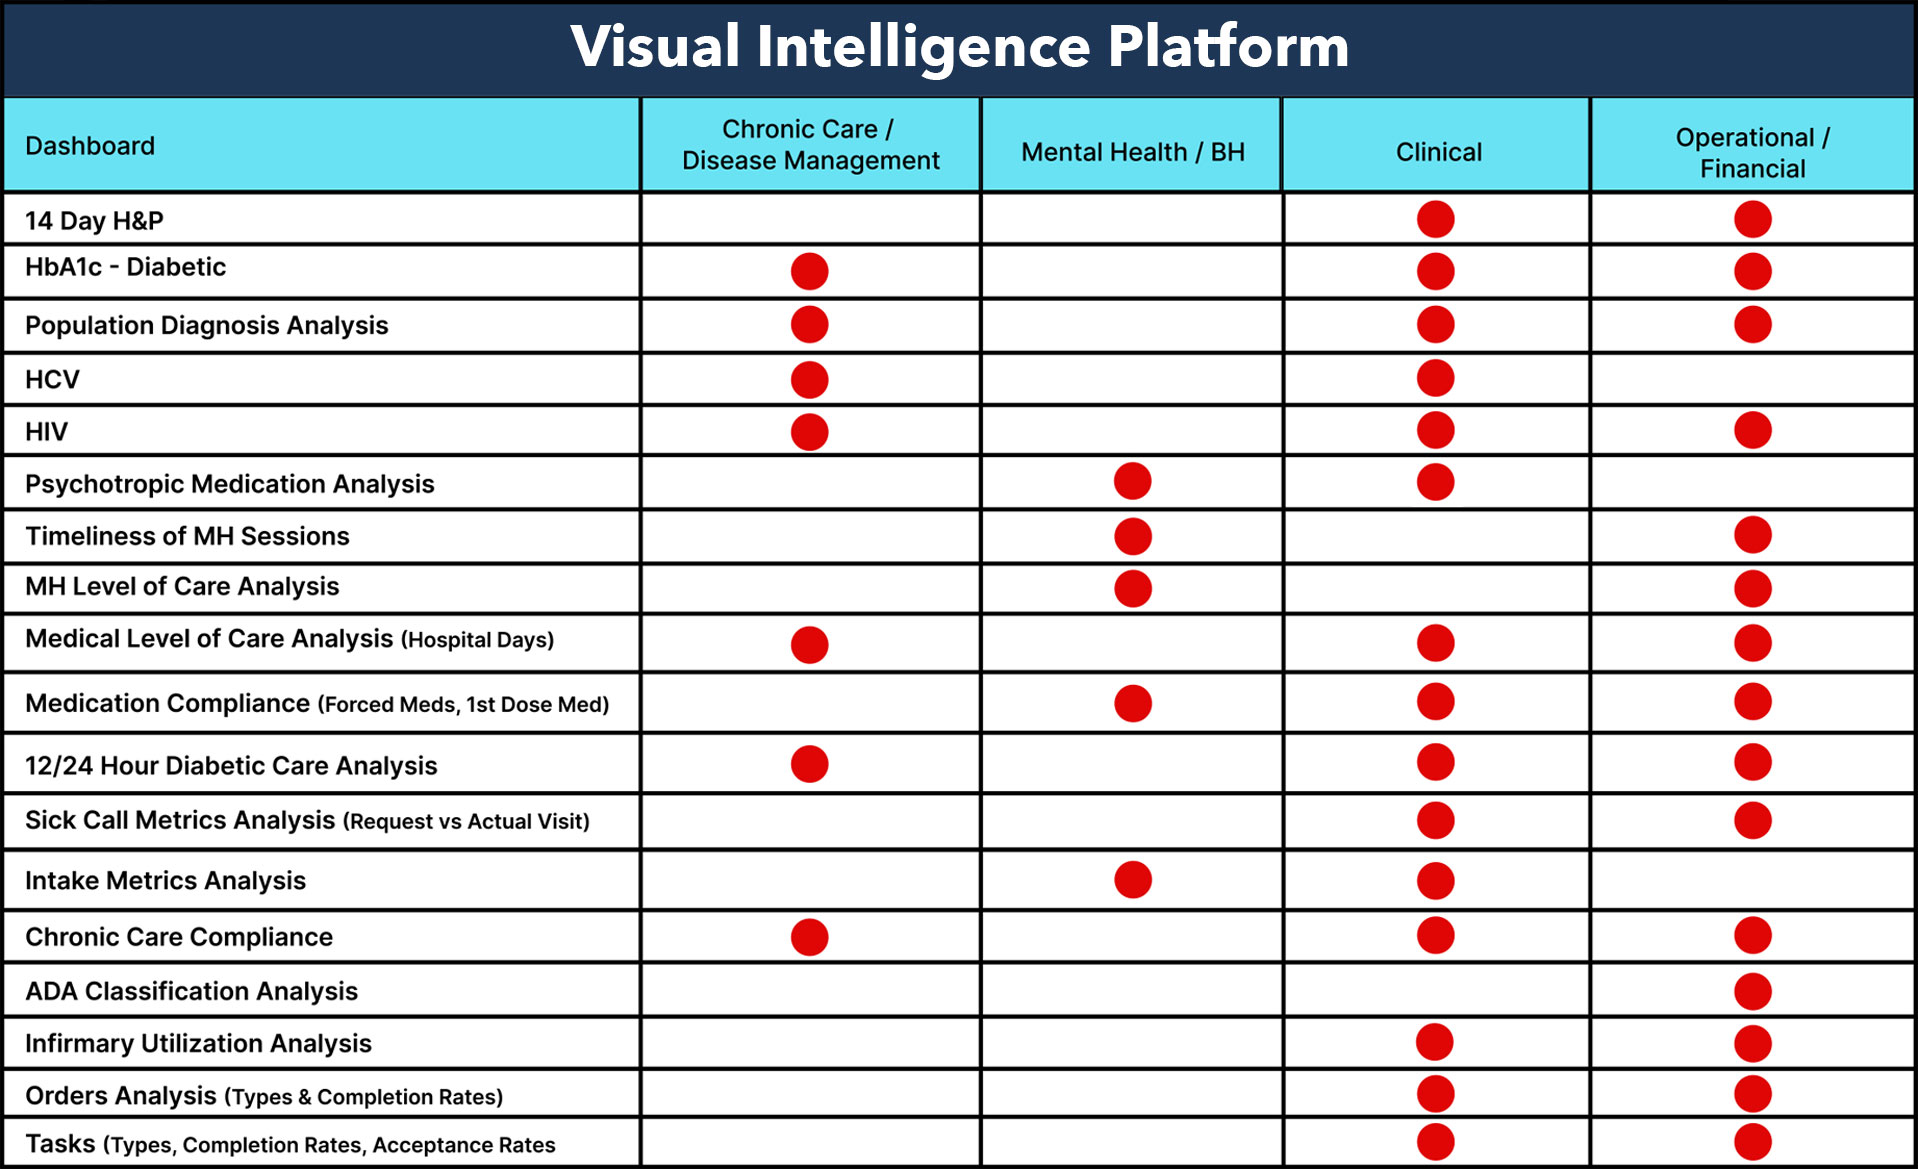 Visual Intelligence Platform for Chronic Care, Disease Management, Mental Health, Clinical, and Operational or Financial